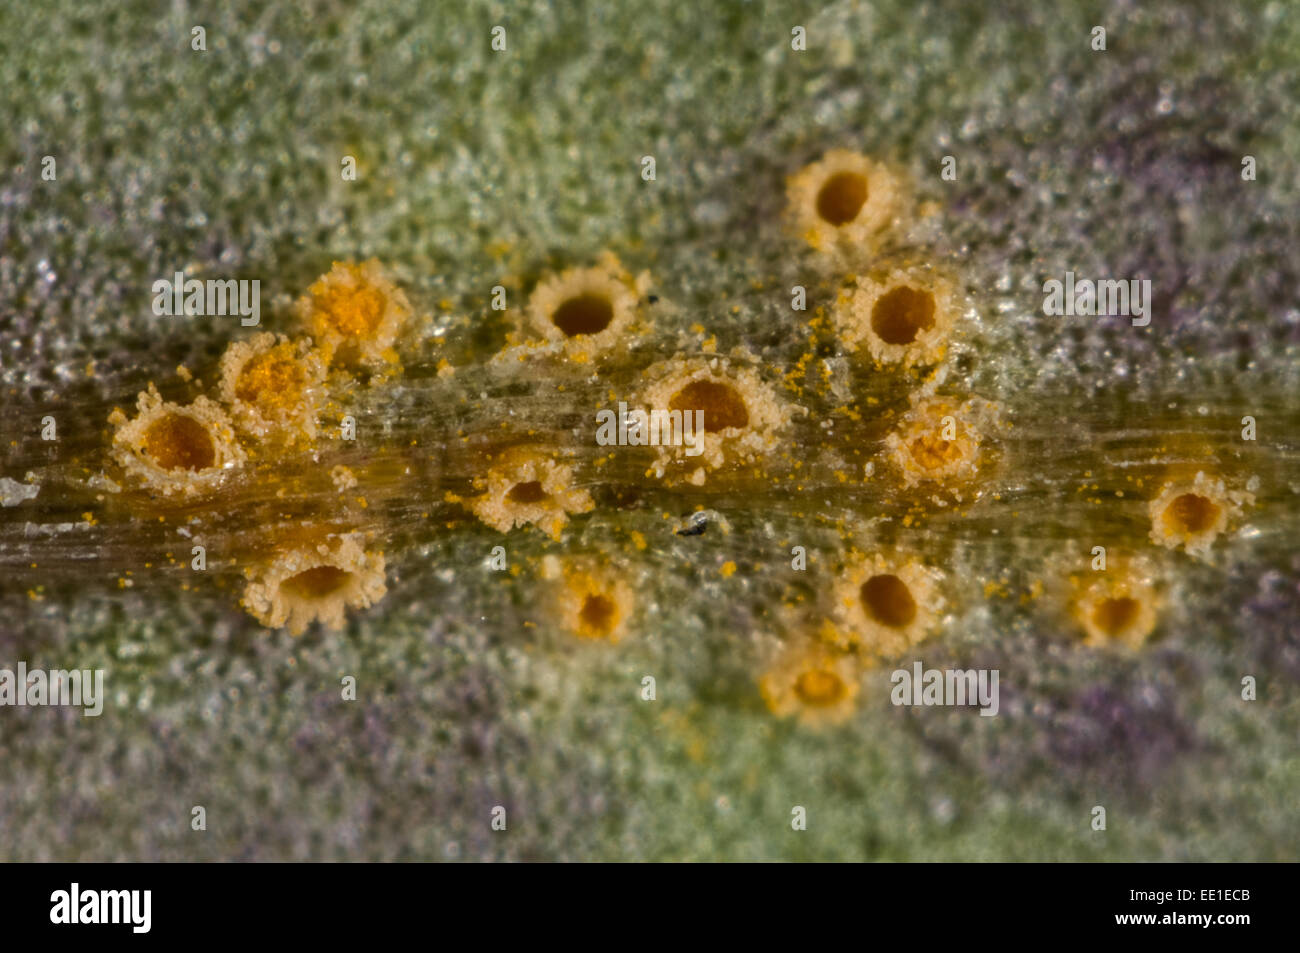 Photomicrograph of the aecia of groundsel rust, Puccinia lagenophorae, on the leaf surface of the weed groundsel, Senecio vulgaris, Stock Photo